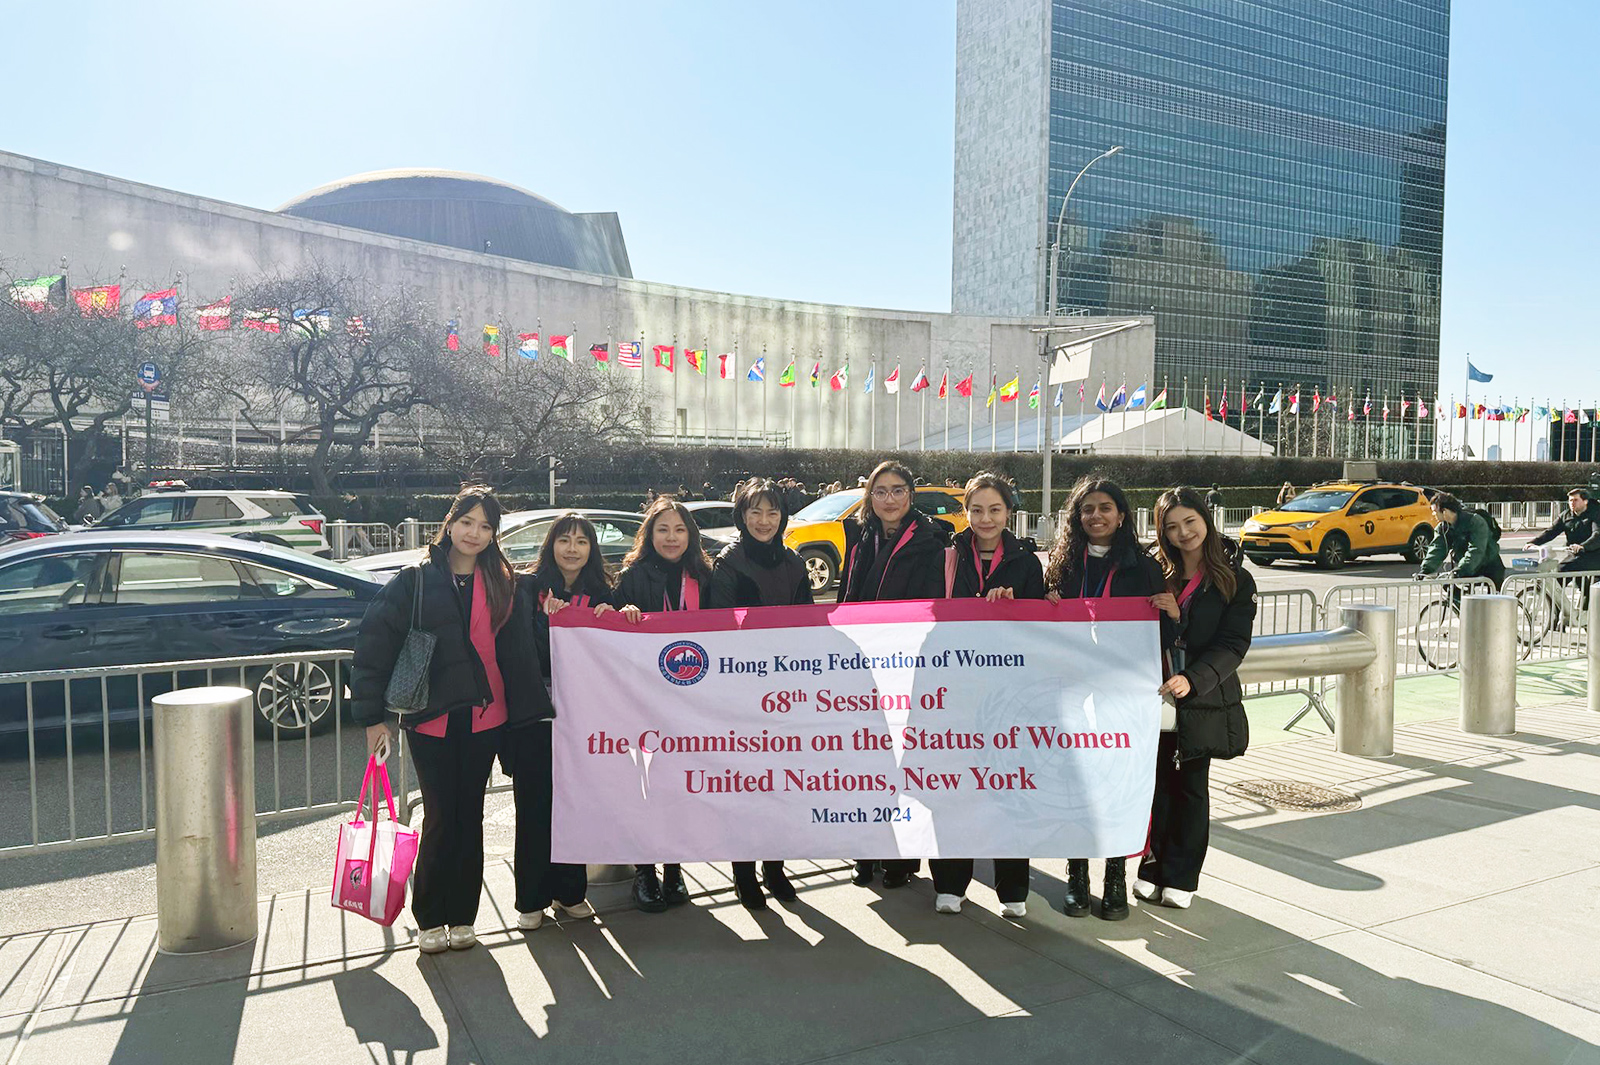 Elina (first from left) and Nicola (second from left) represent CityUHK as part of the delegation from the Hong Kong Federation of Women (HKFW) at UN CSW68.